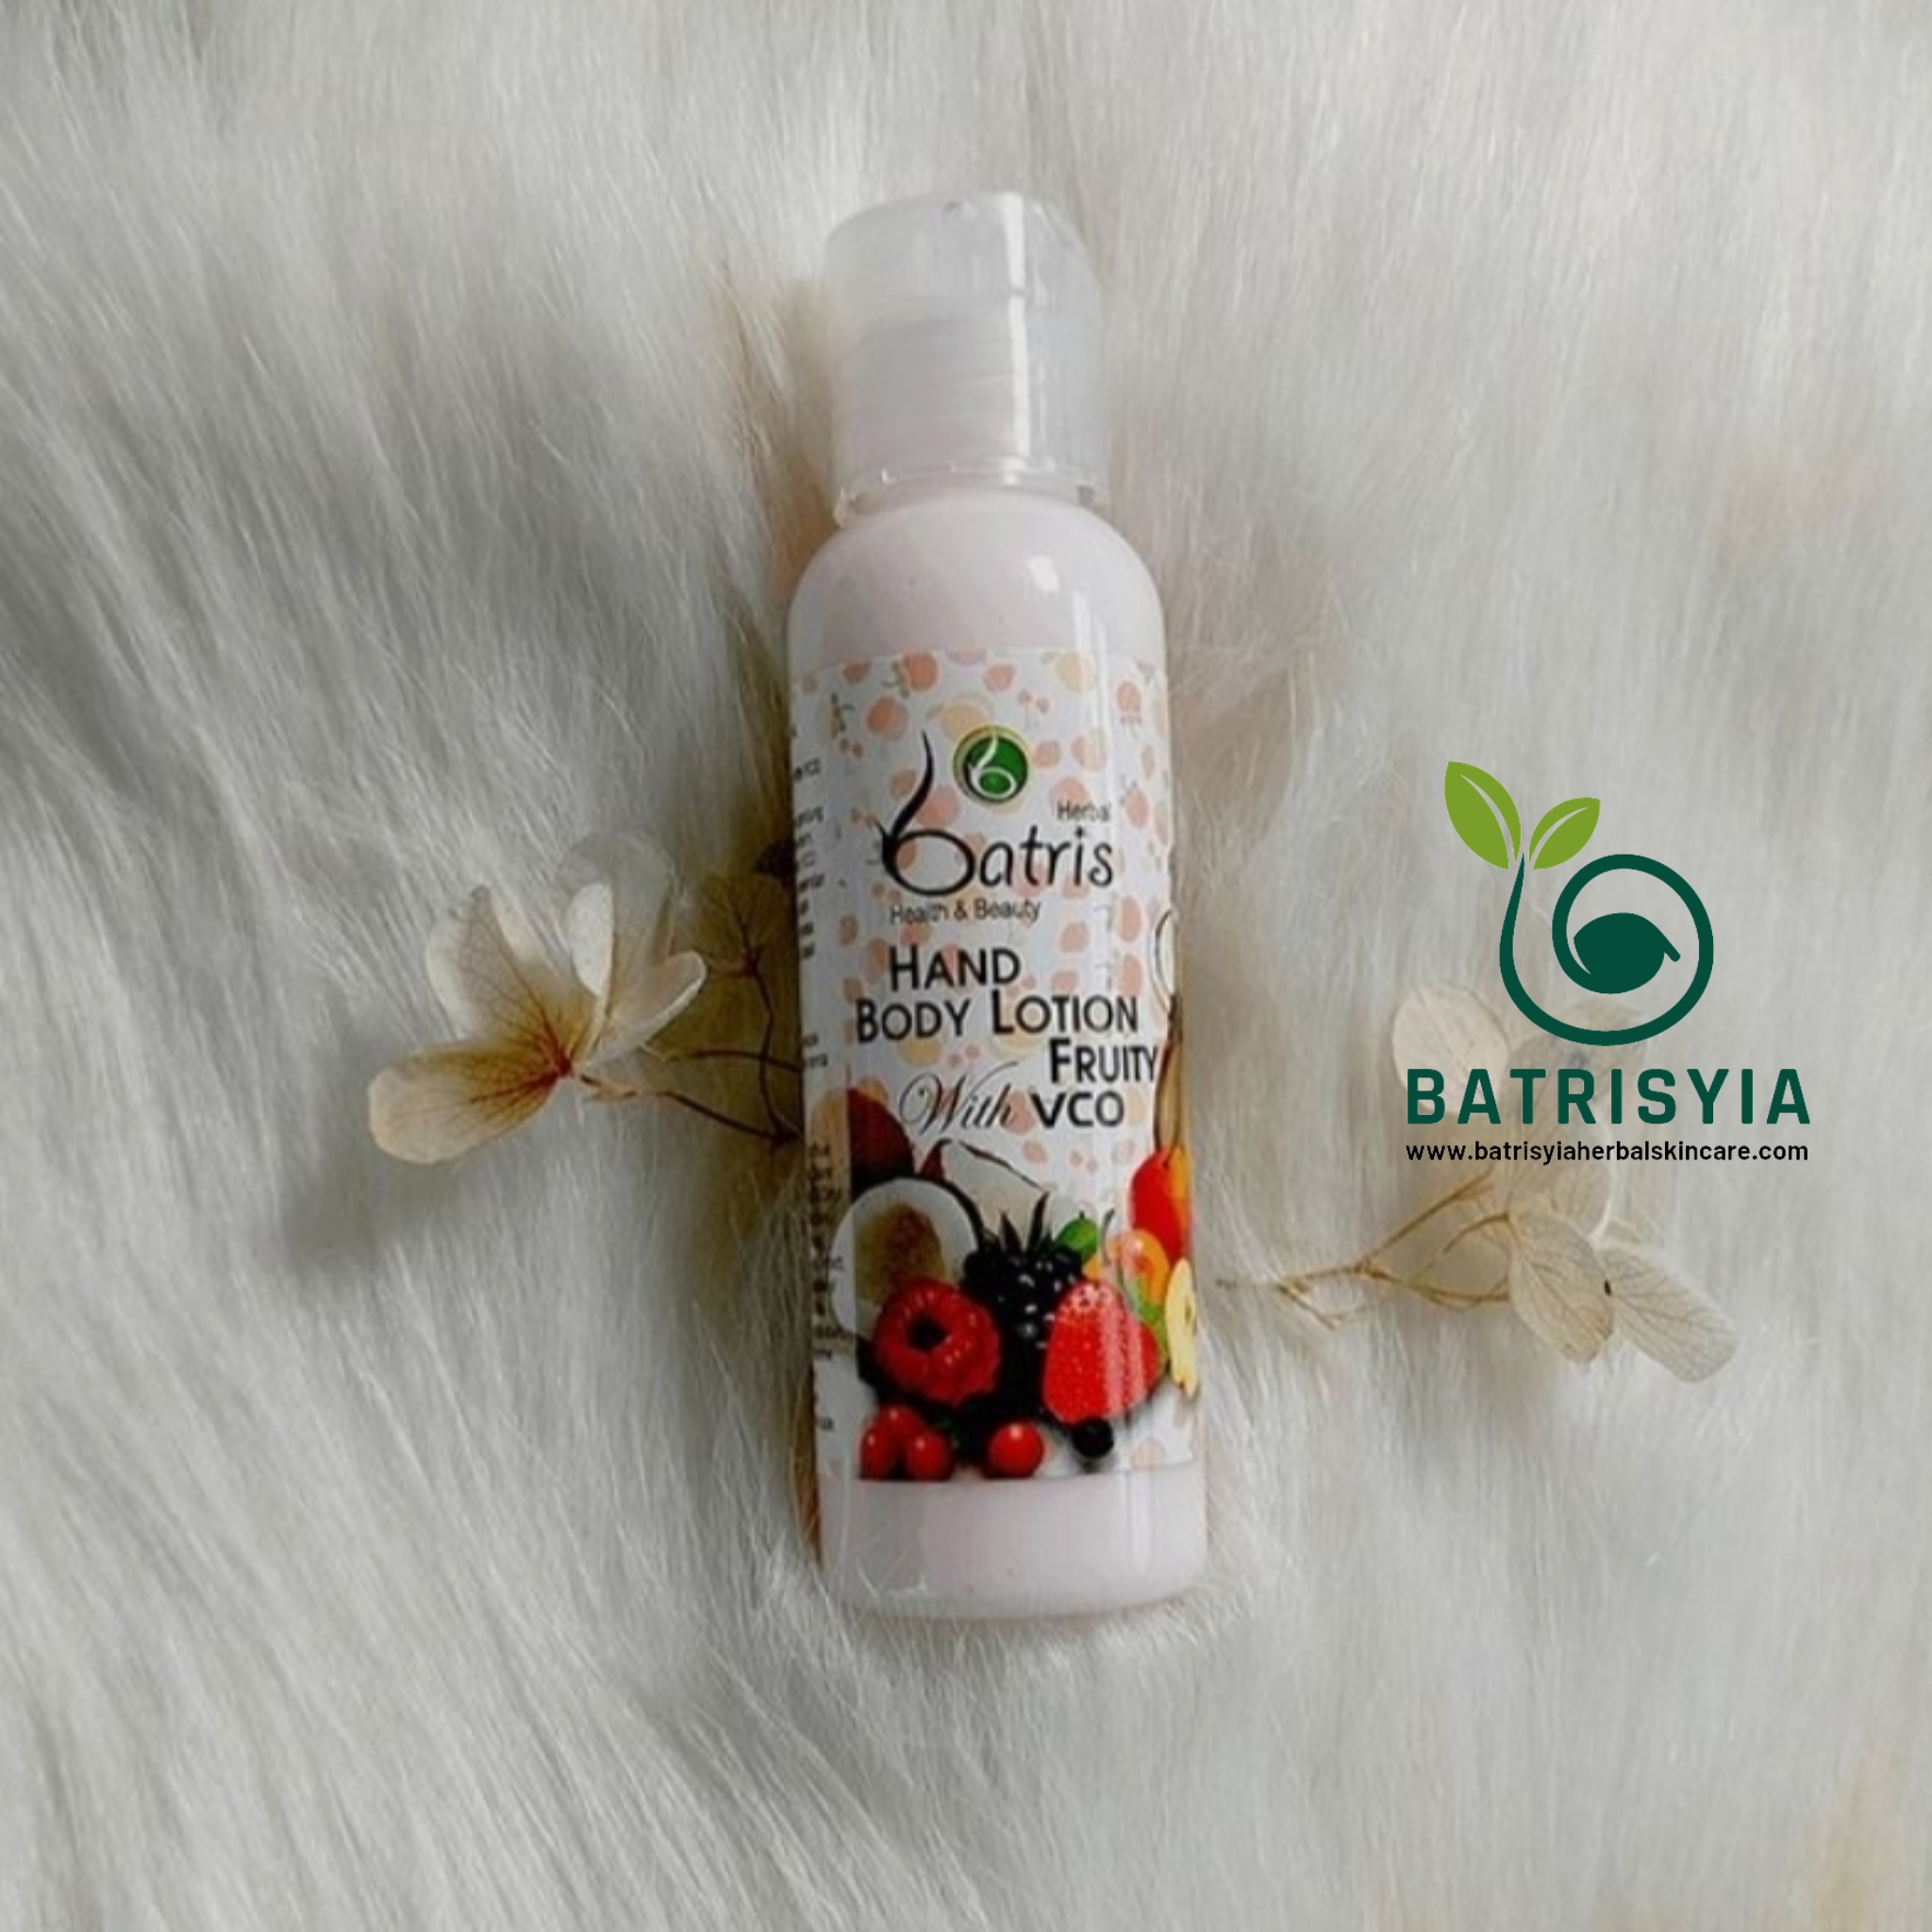 Hand Body Lotion Fruity with VCO